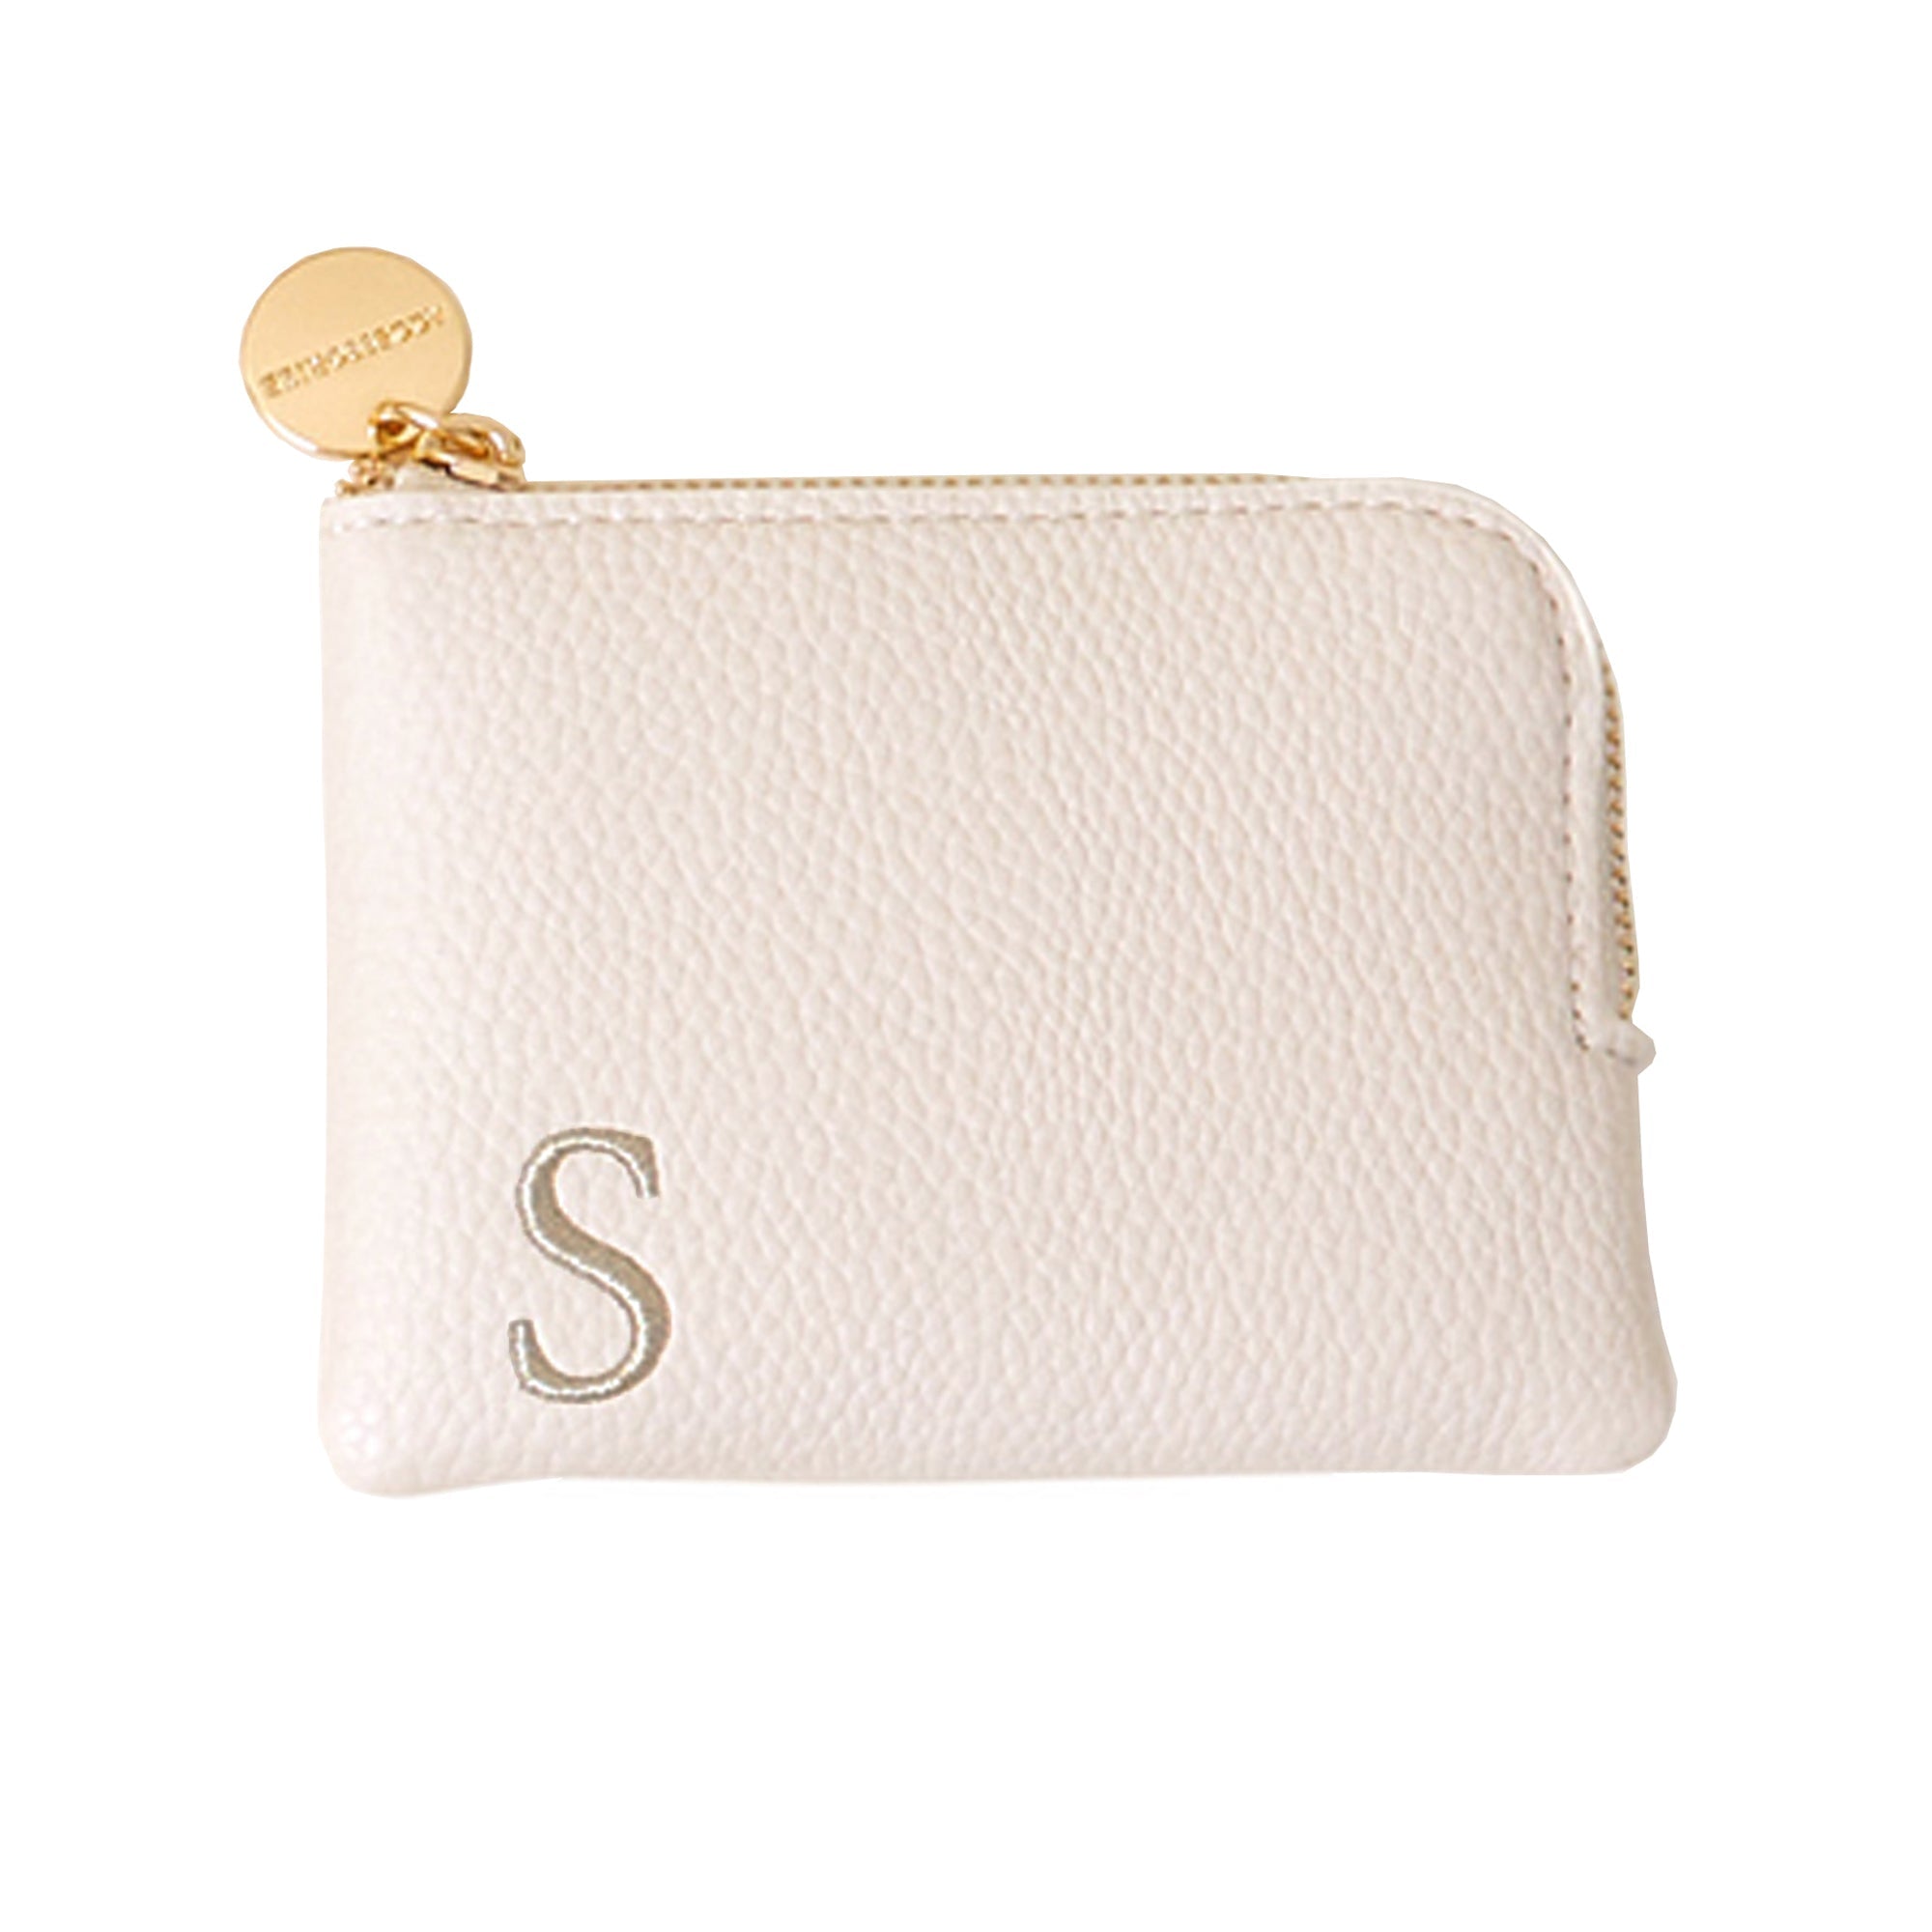 How to Clean a White Leather Purse: 5 Steps